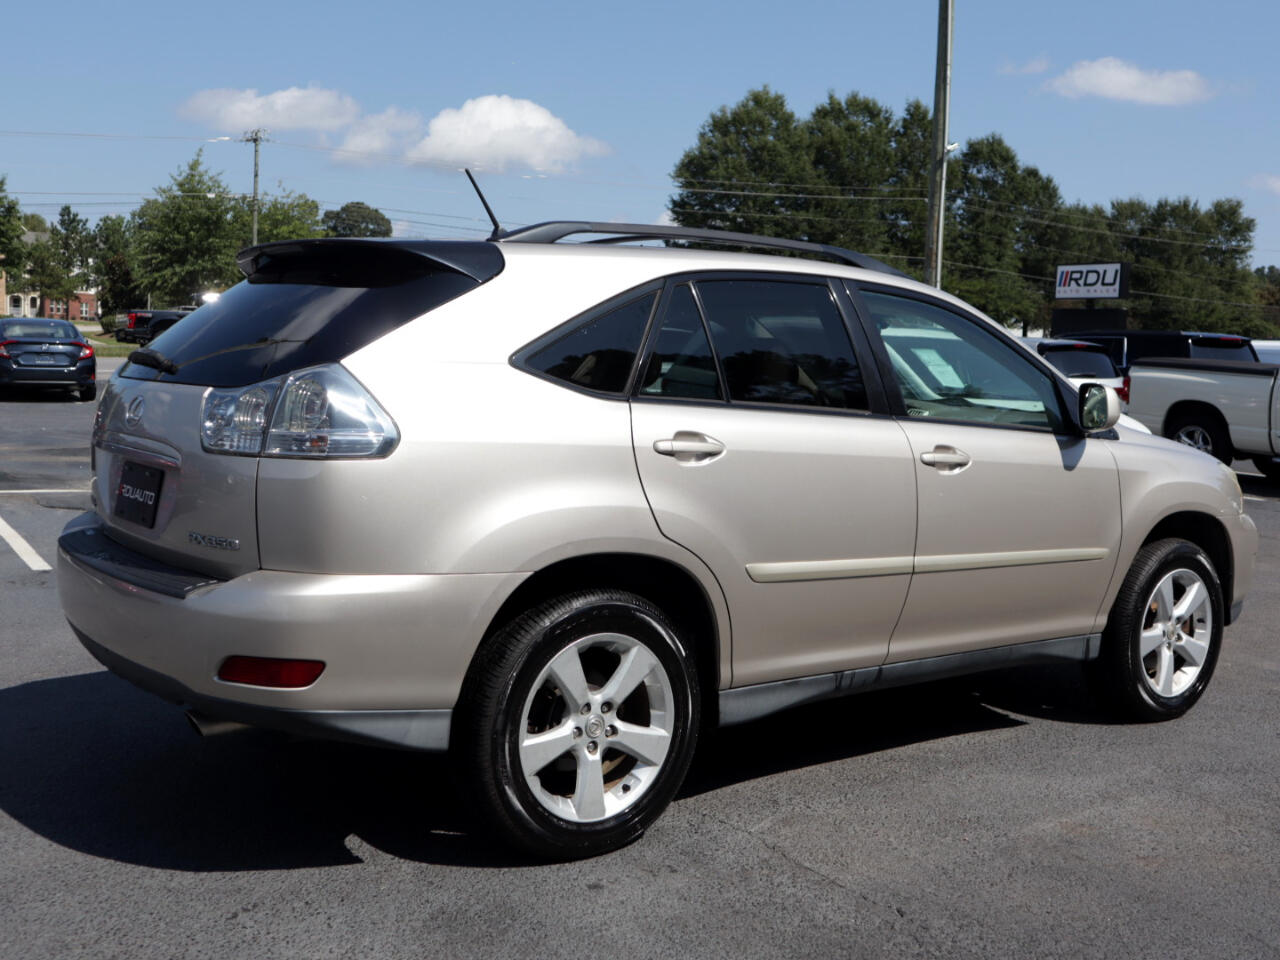 Pre-Owned 2007 Lexus RX 350 AWD SUV in Raleigh #002333 | RDU Auto Sales